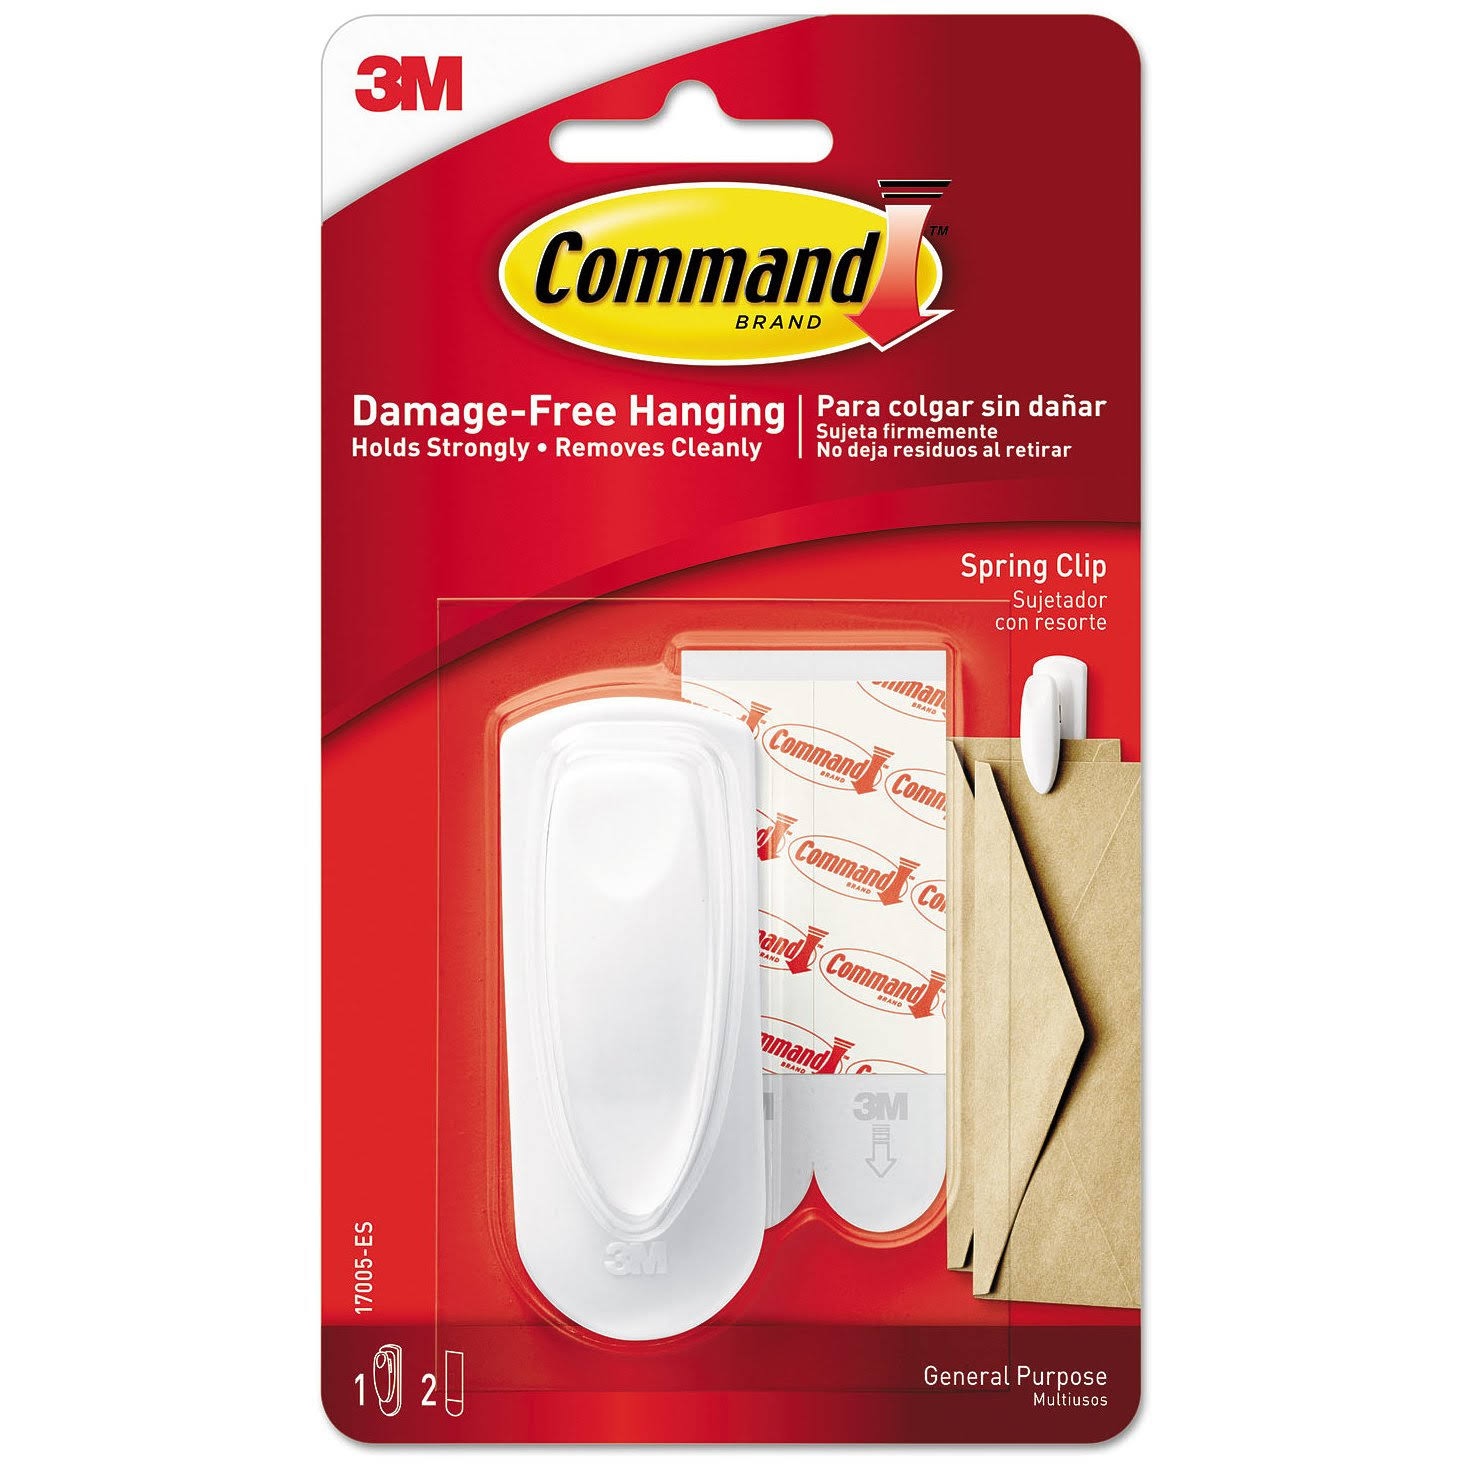 3M Command Adhesive Spring Clip